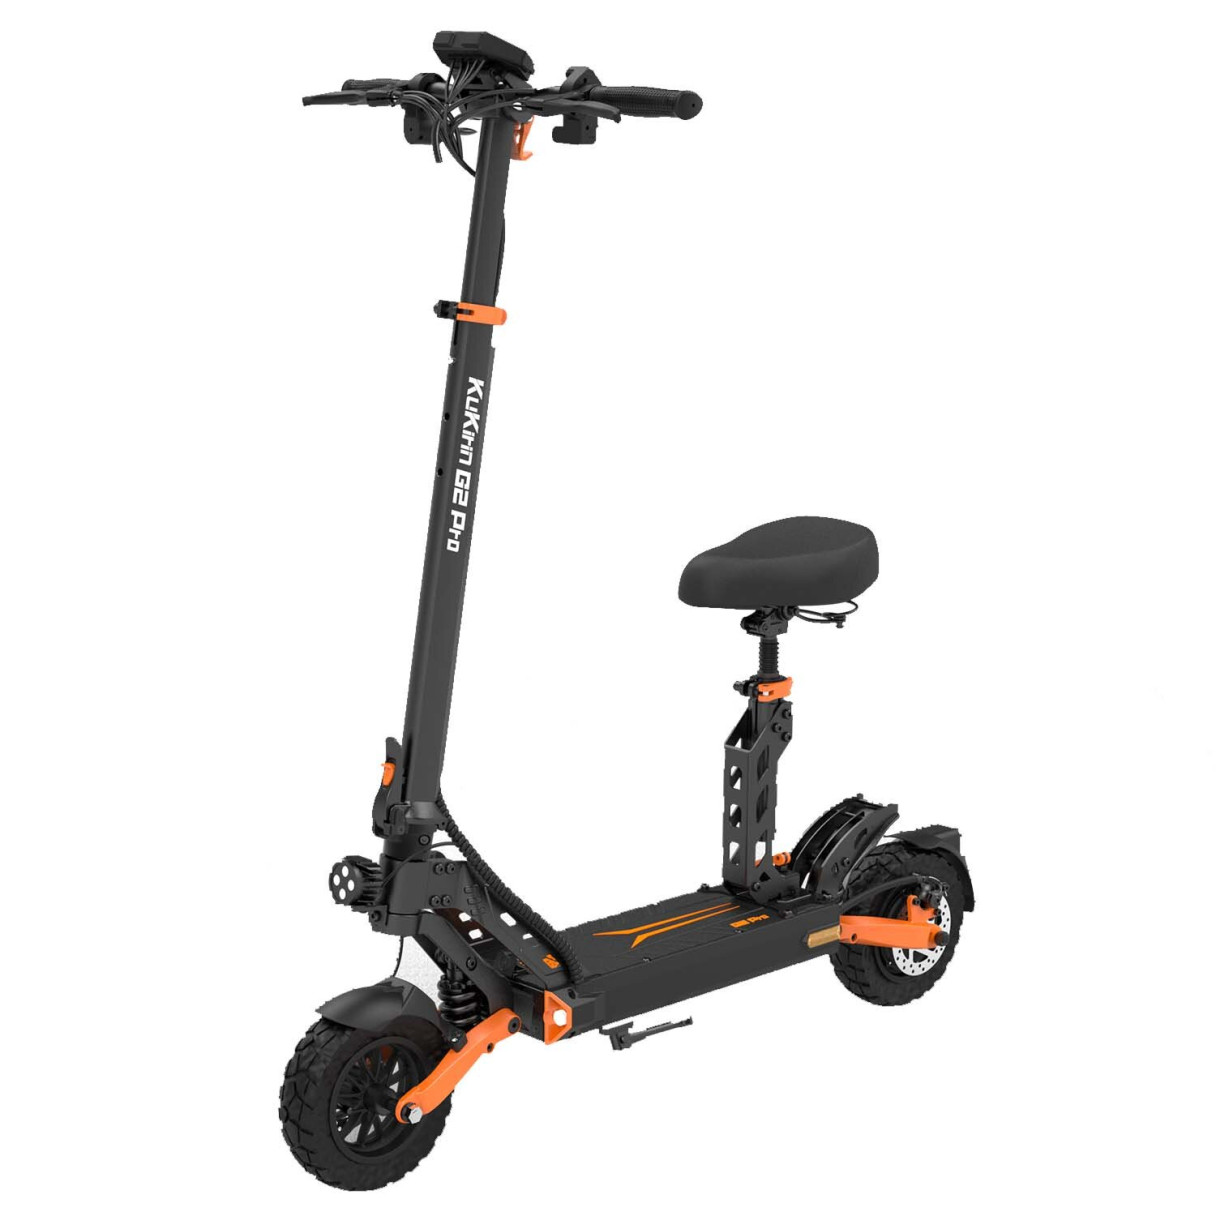 [EU DIRECT] KuKirin G2 Pro NEW Version Electric Scooter 15.6Ah 48V 600W 9inch Folding Moped Electric Scooter 55-60KM Mileage Electric Scooter Max Load 120Kg